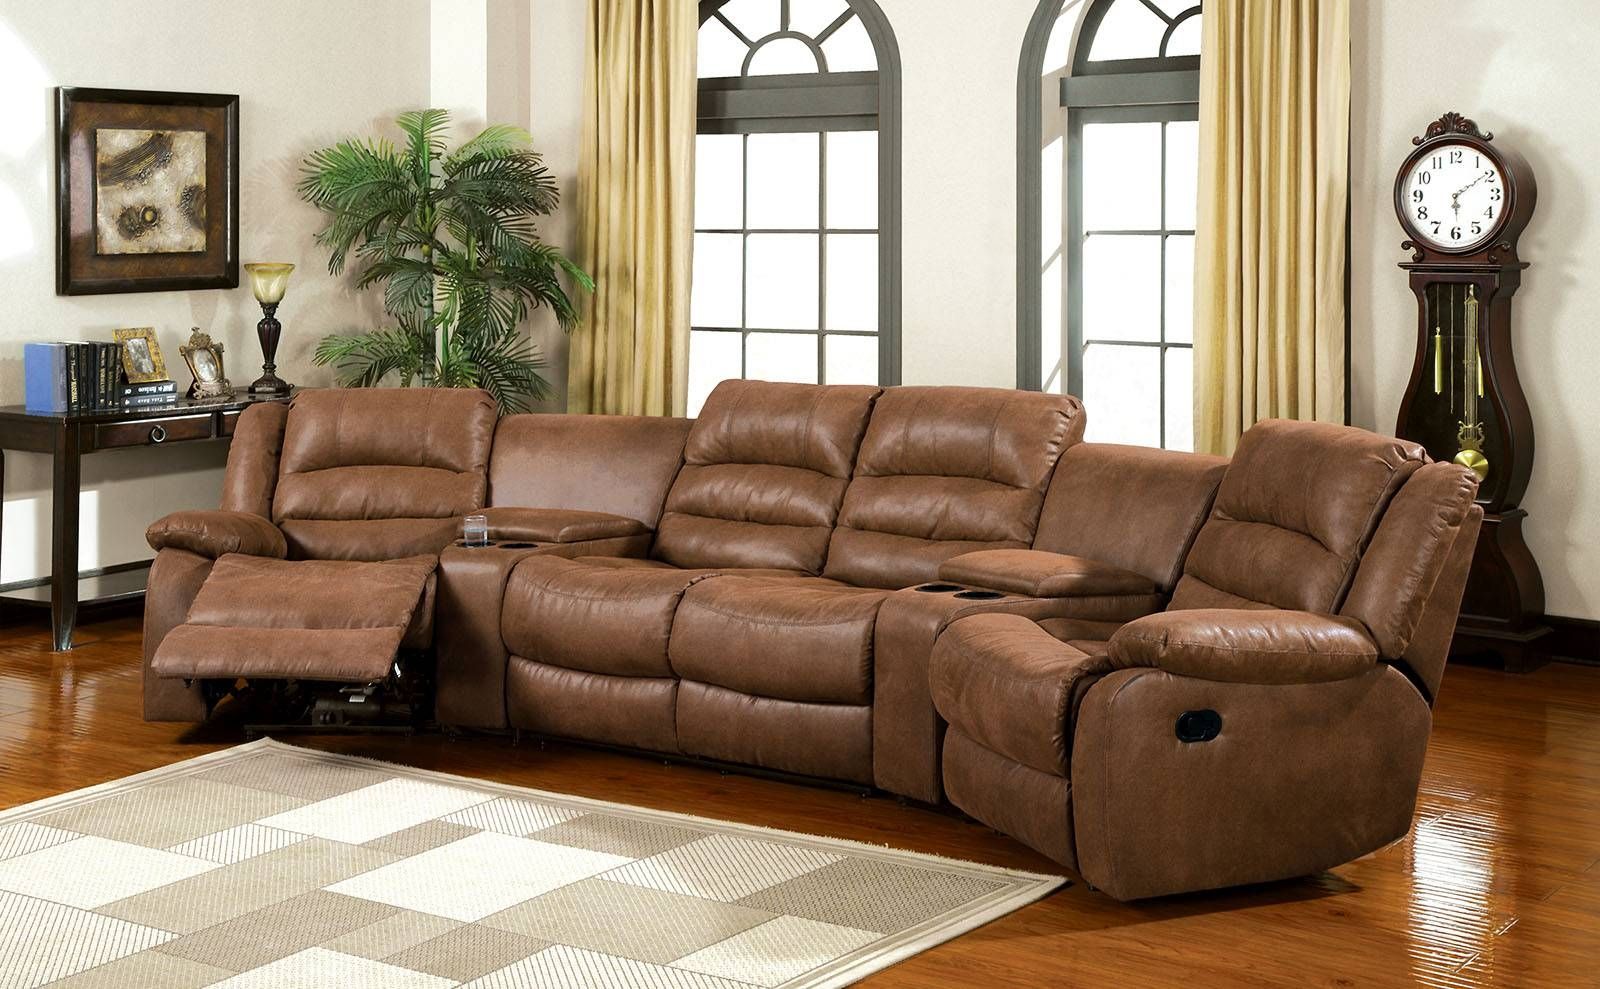 Furniture Of America Cm6123 Manchester Brown Leather Like Fabric 2 Inside Theatre Sectional Sofas (View 5 of 30)